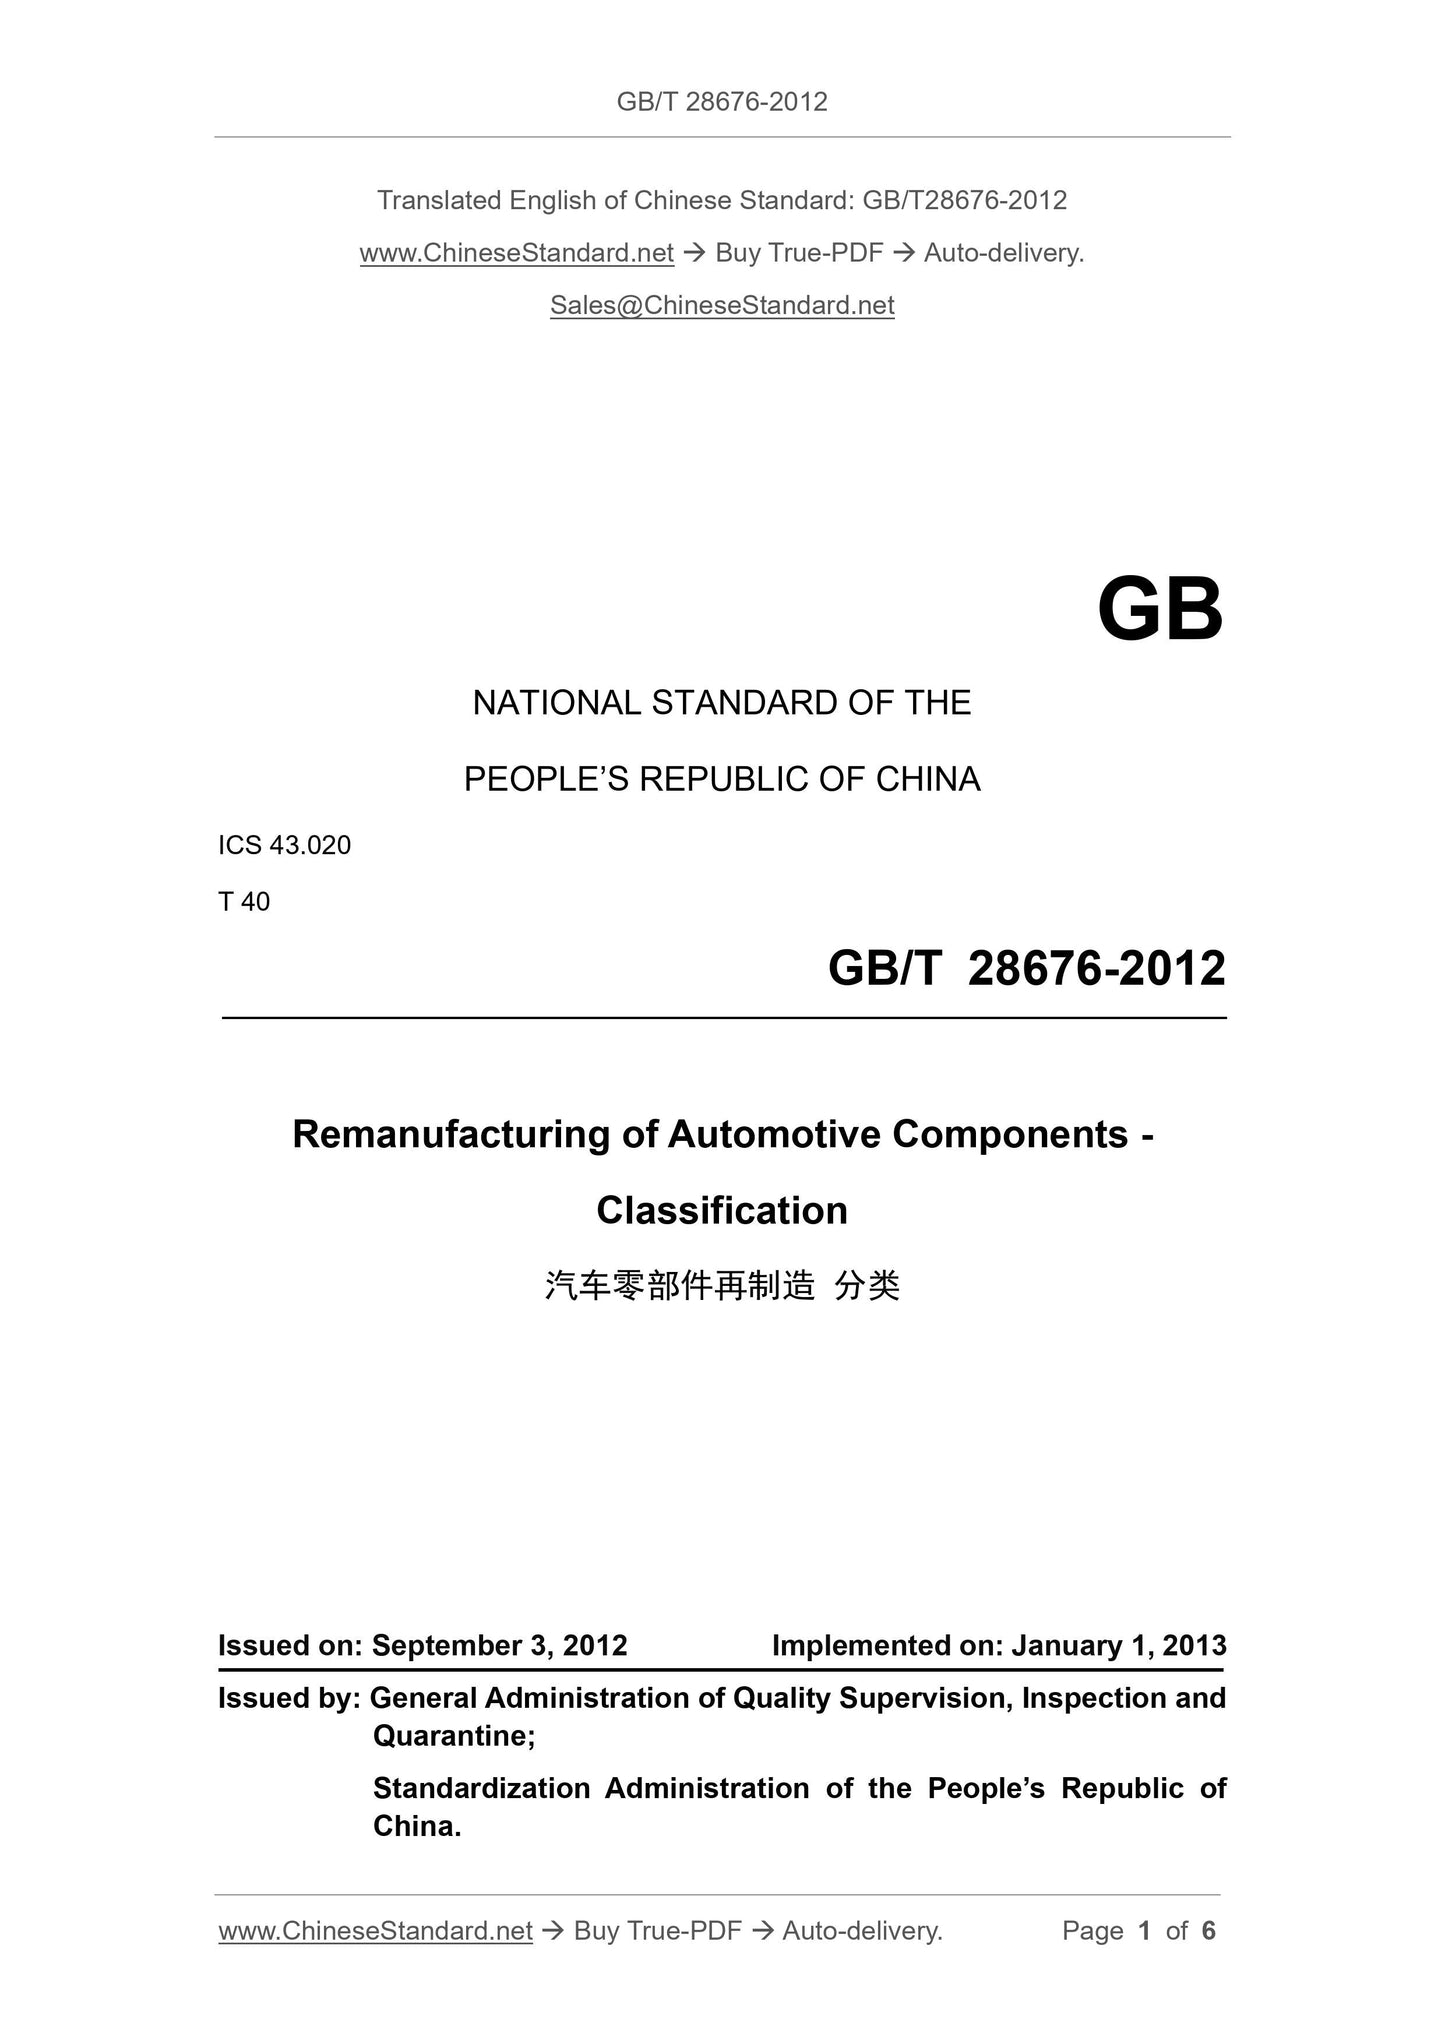 GB/T 28676-2012 Page 1